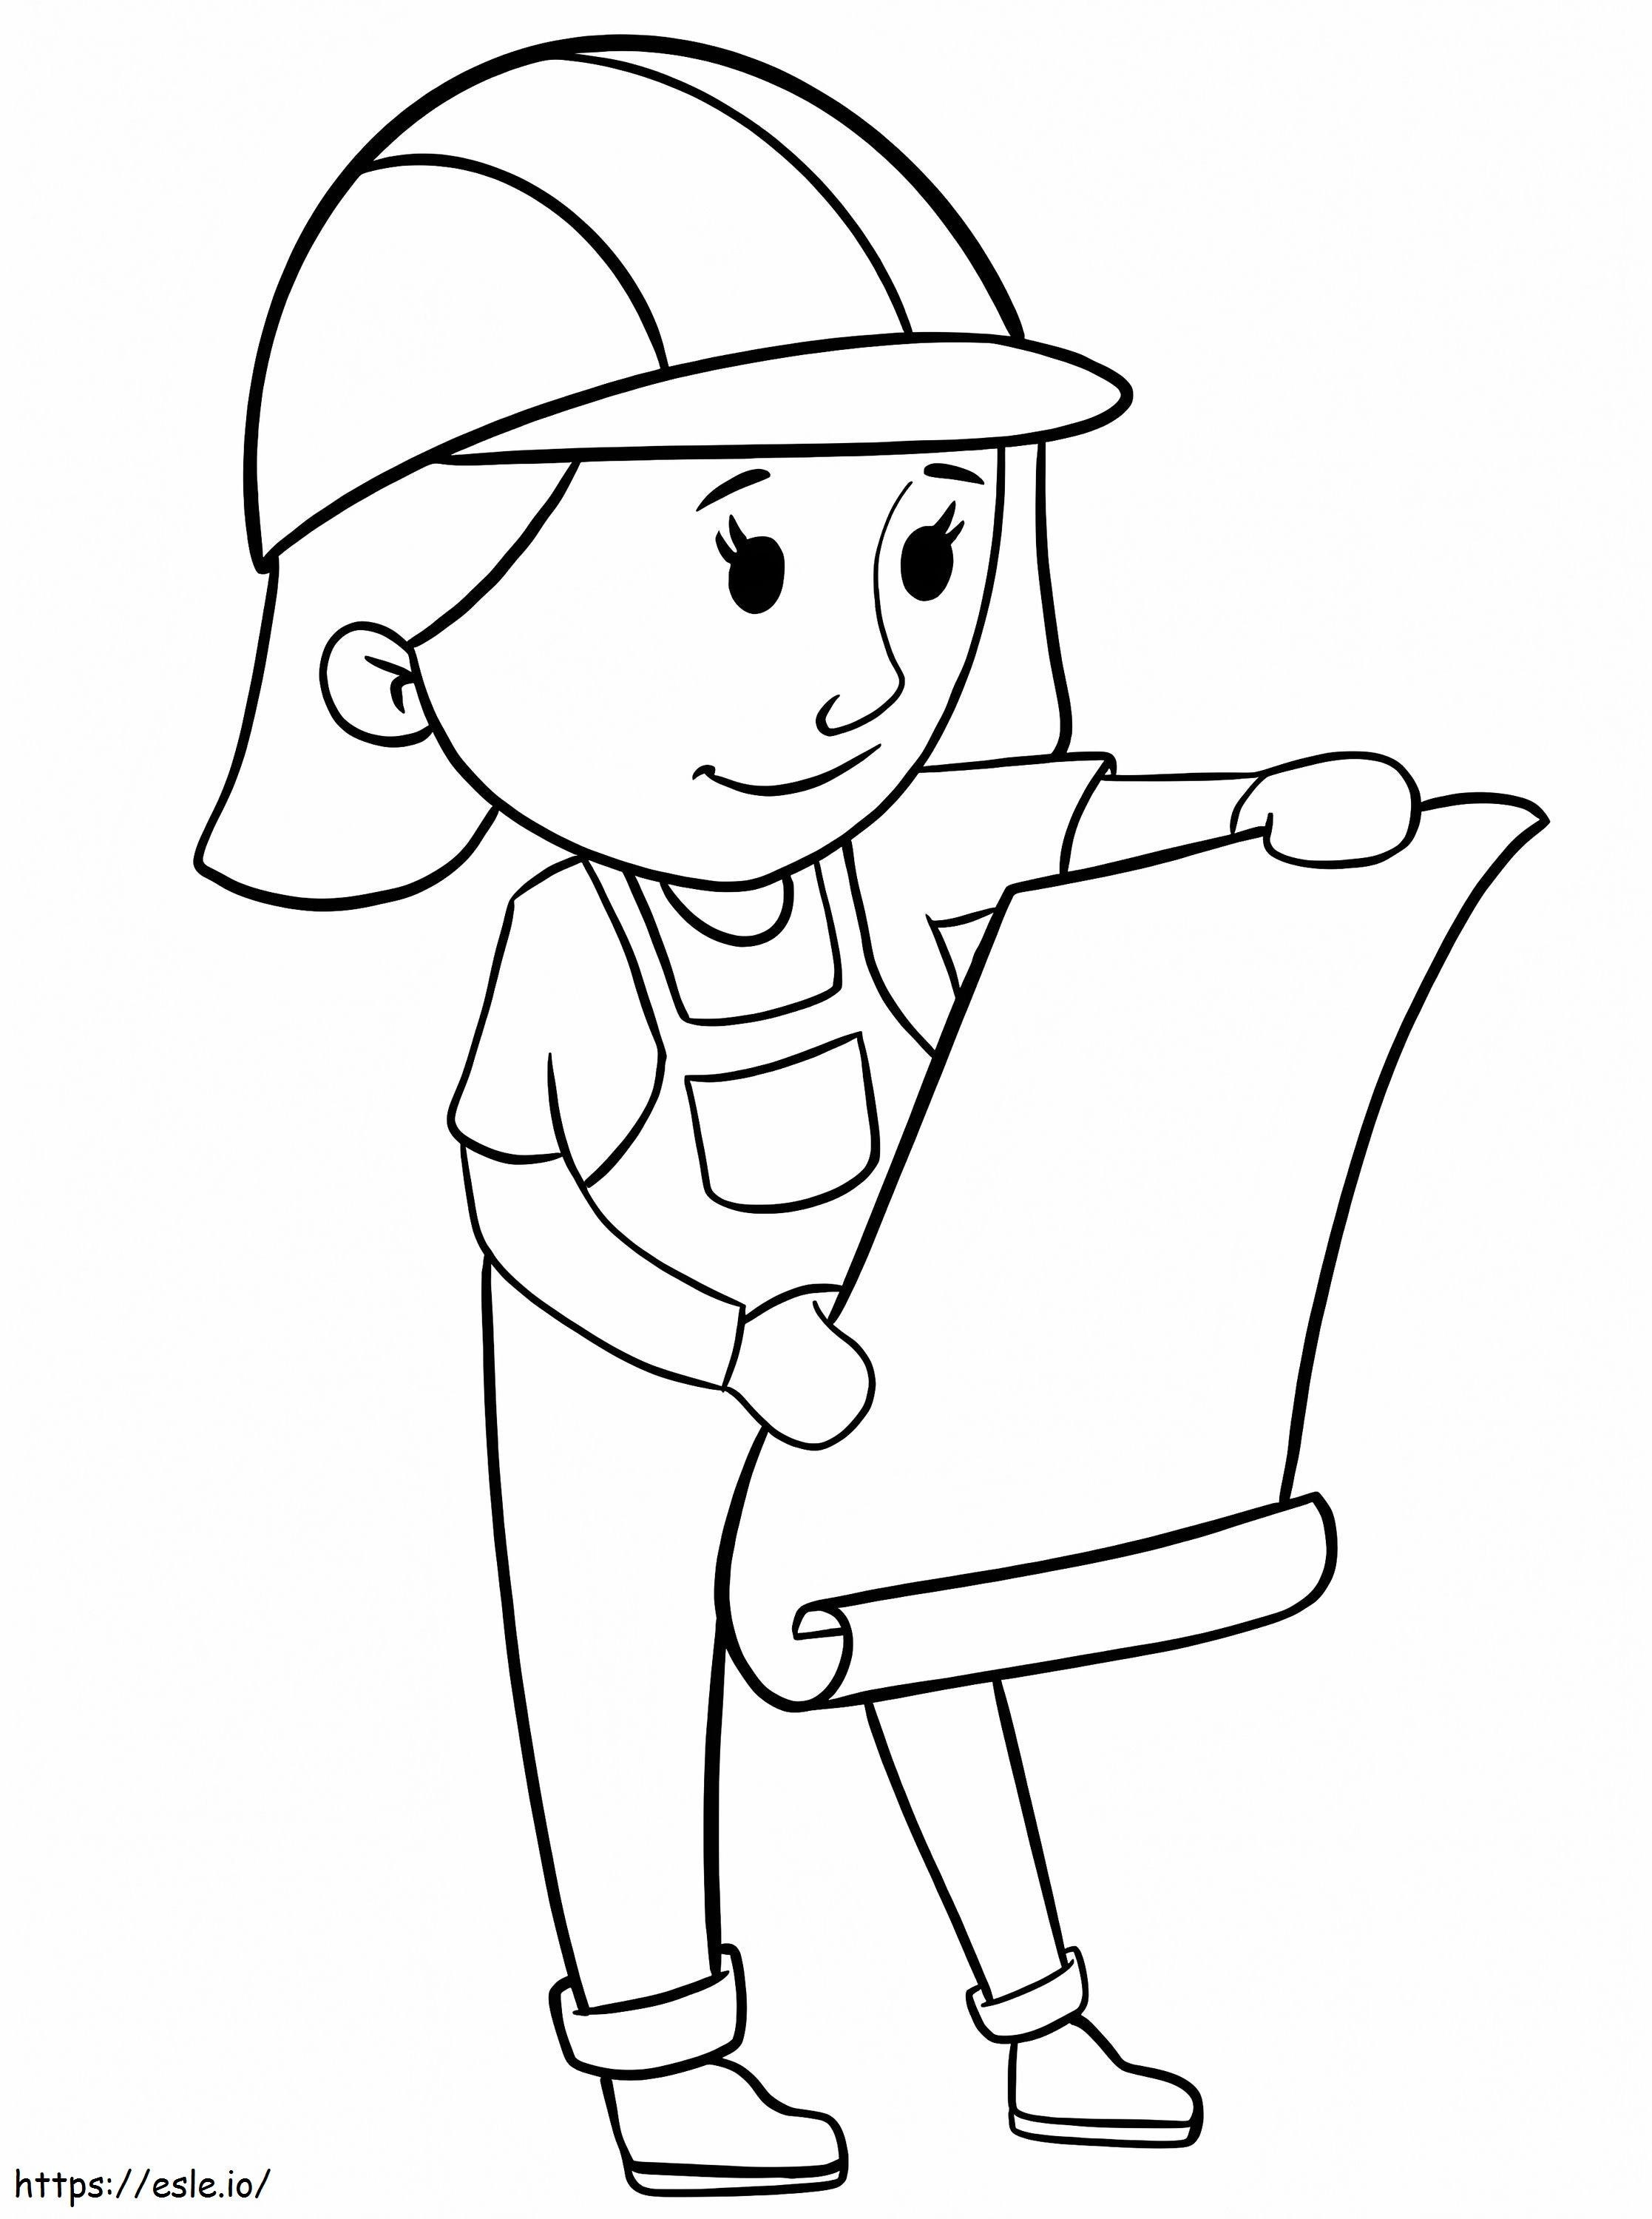 Girl Engineer coloring page